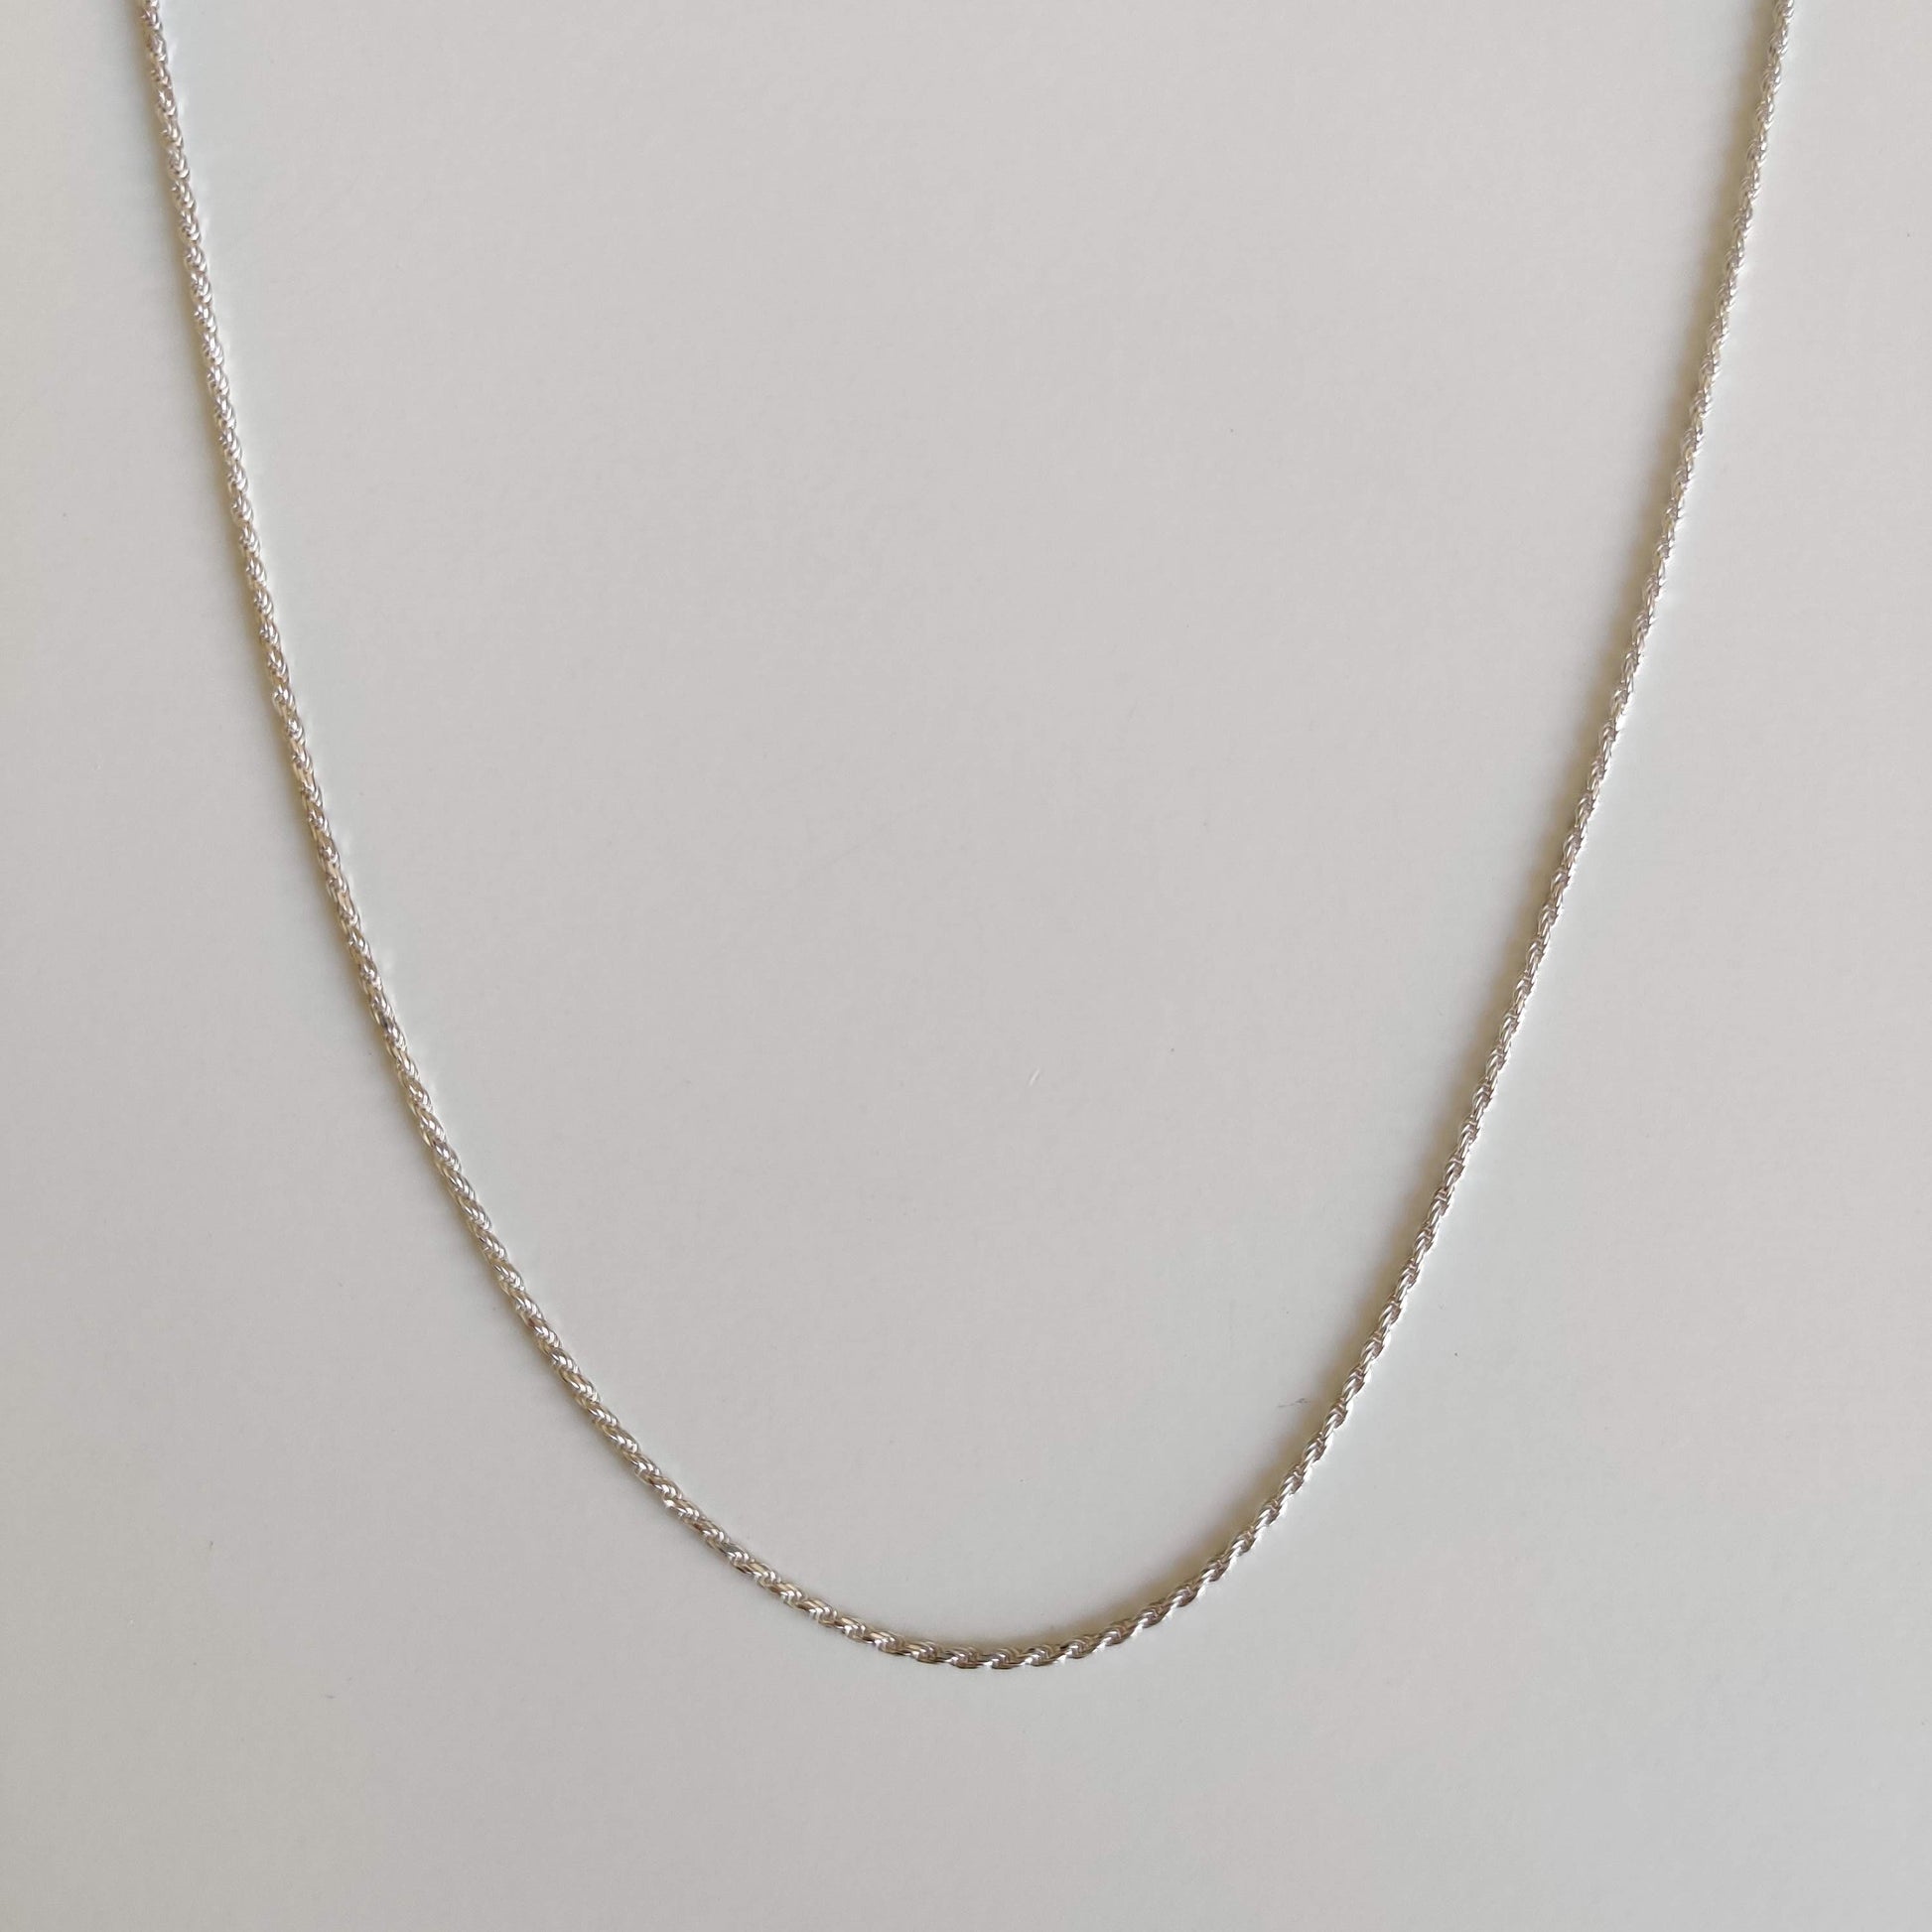 Sterling Silver 925 Spiga Chain Necklace - Rivendell Shop